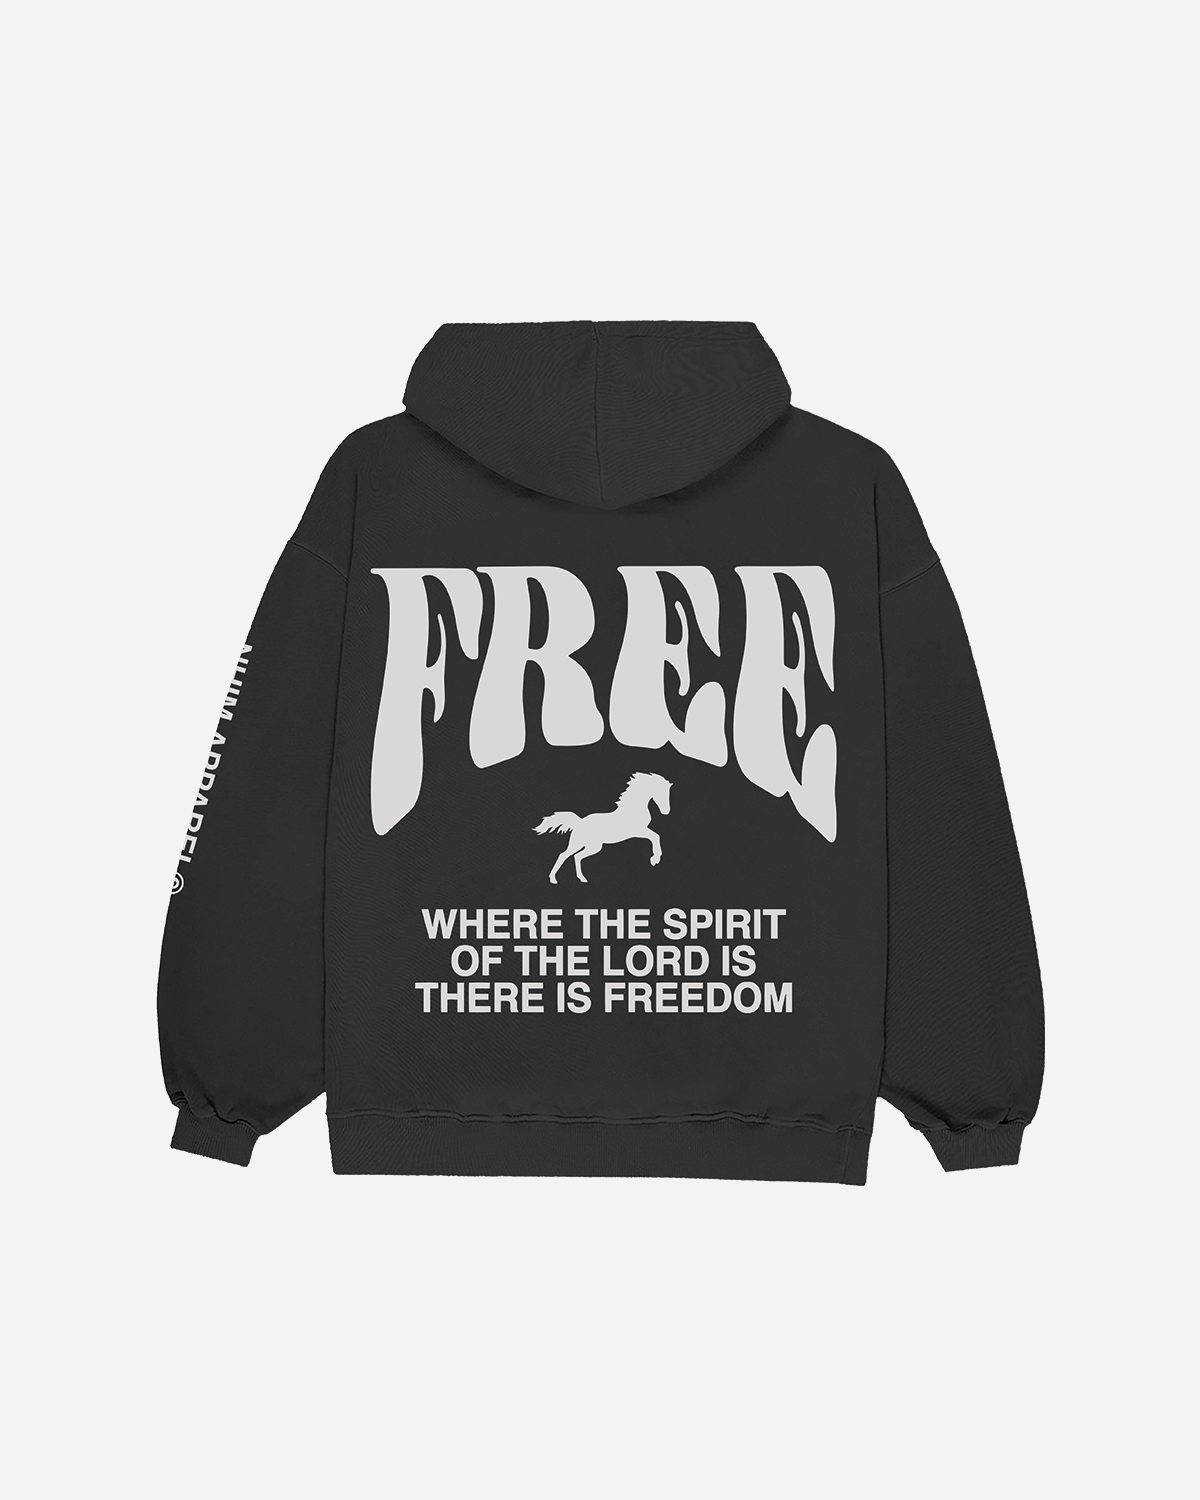 Christian hoodie sweatshirt - where the Spirit of the Lord is there is freedom - FREE